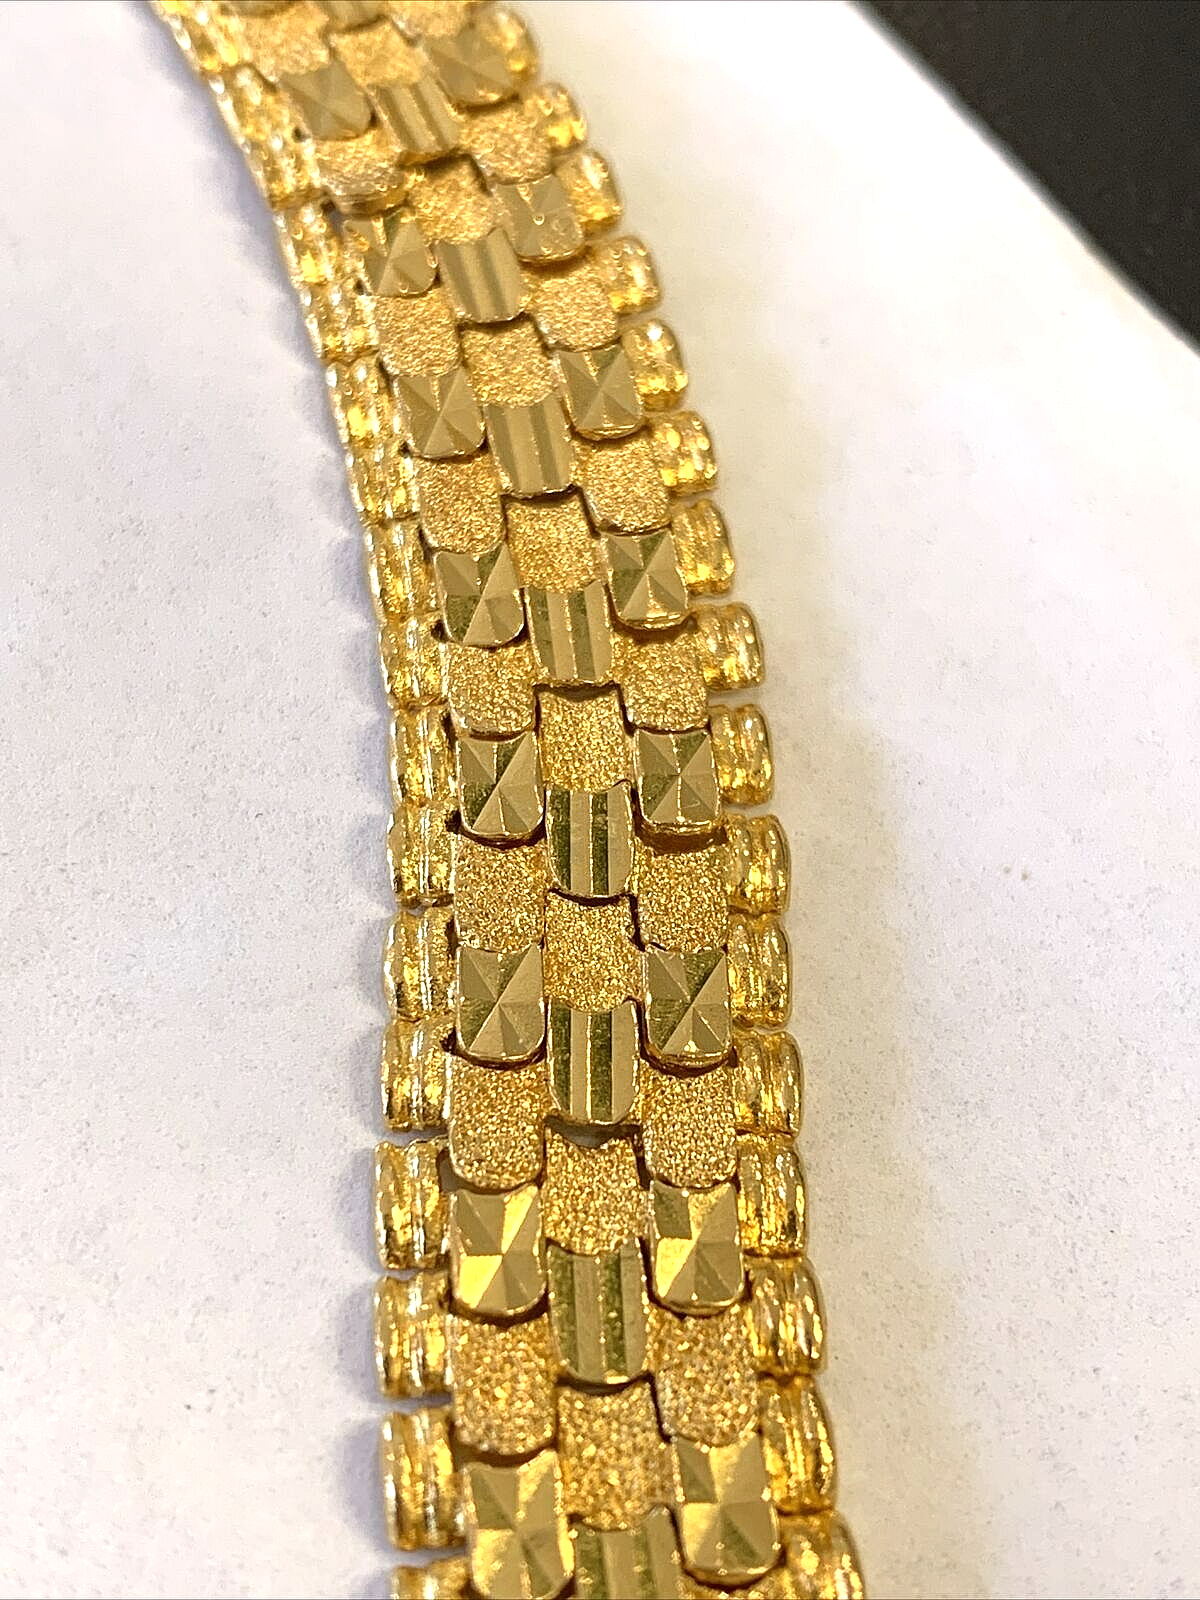 22k Solid Gold Bracelet - 8 Inches - 41.7 Grams - .916 Pure Gold